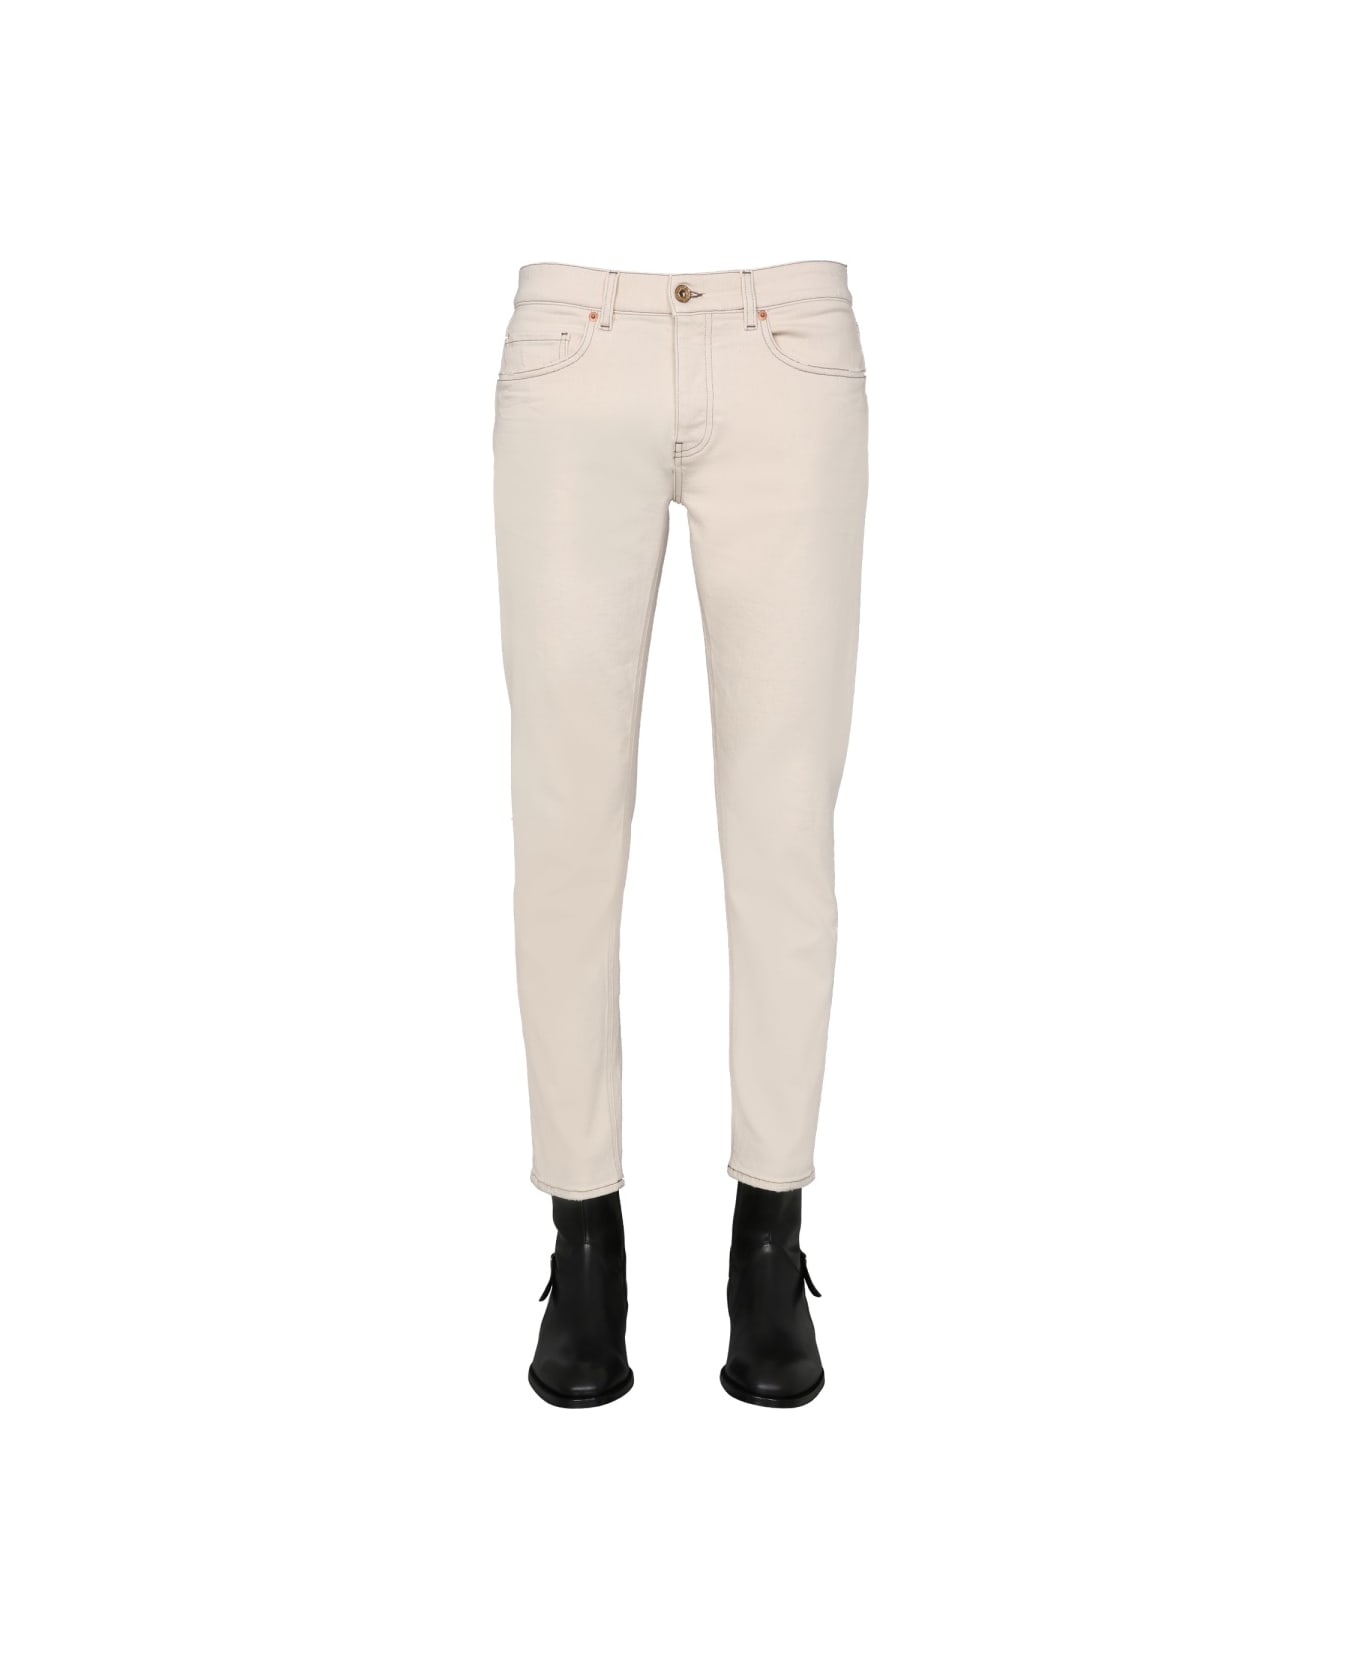 Pence "rico / Sc" Trousers - BEIGE